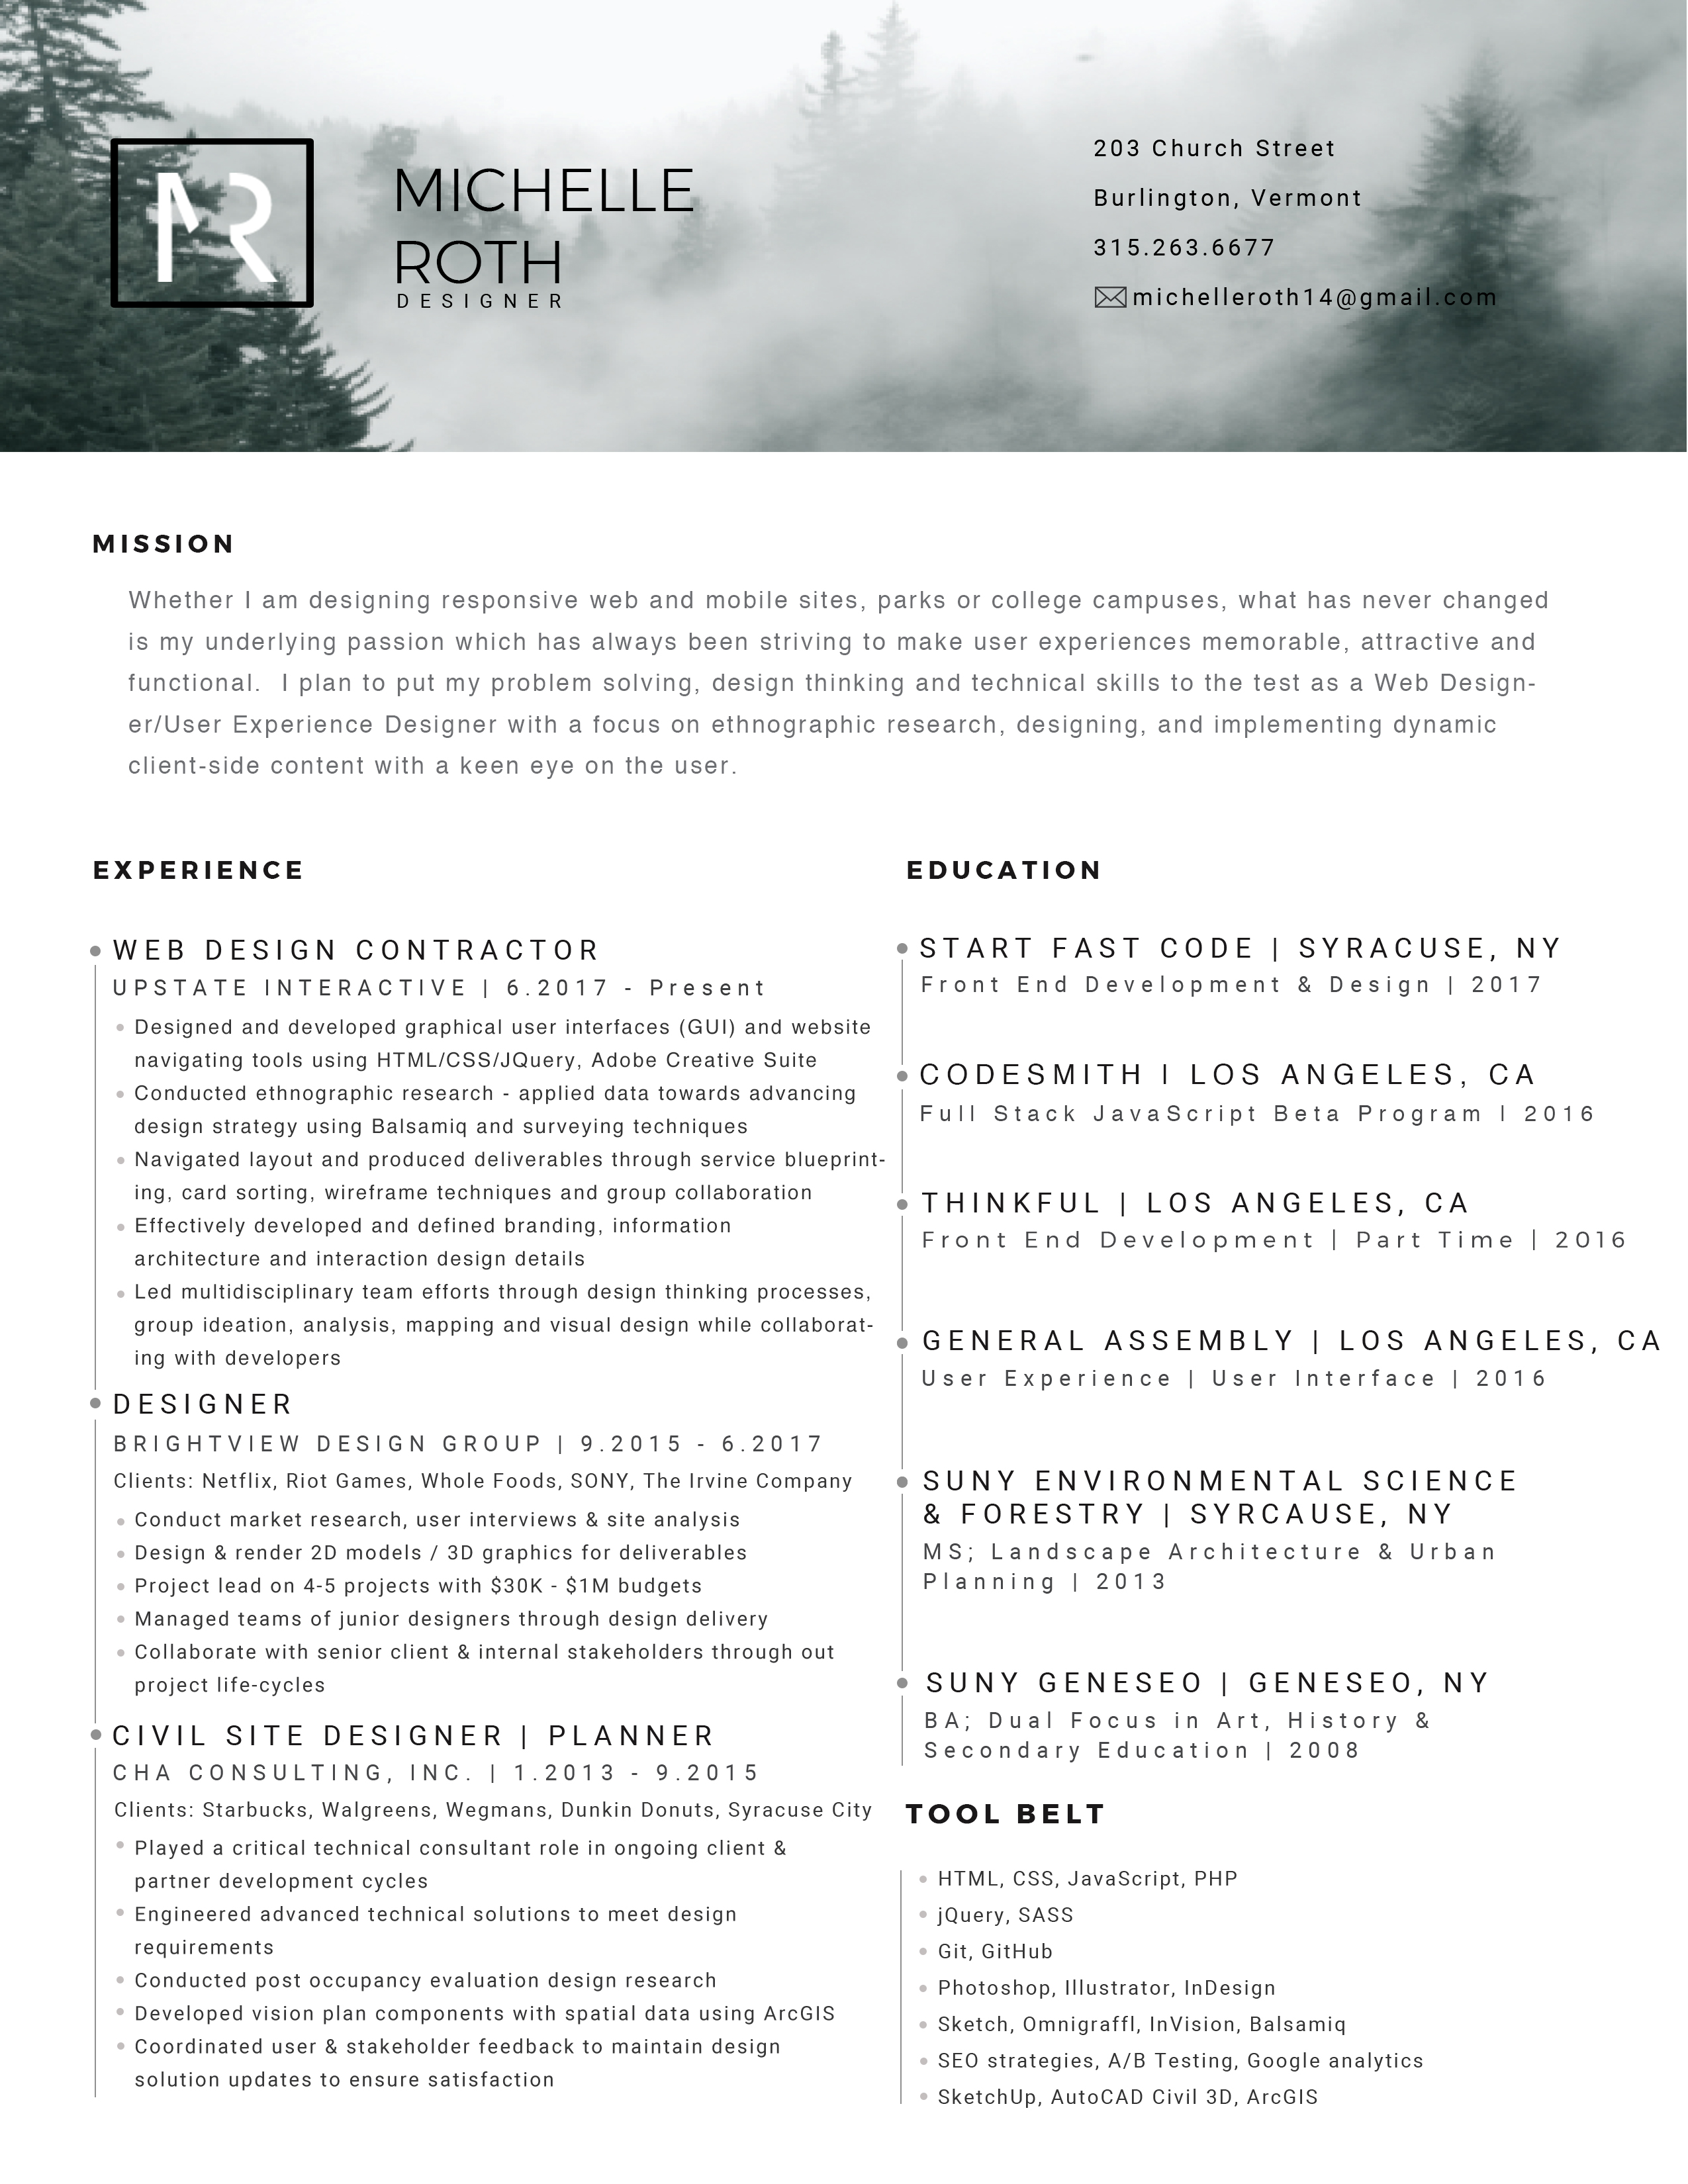 Michelle Roth Resume